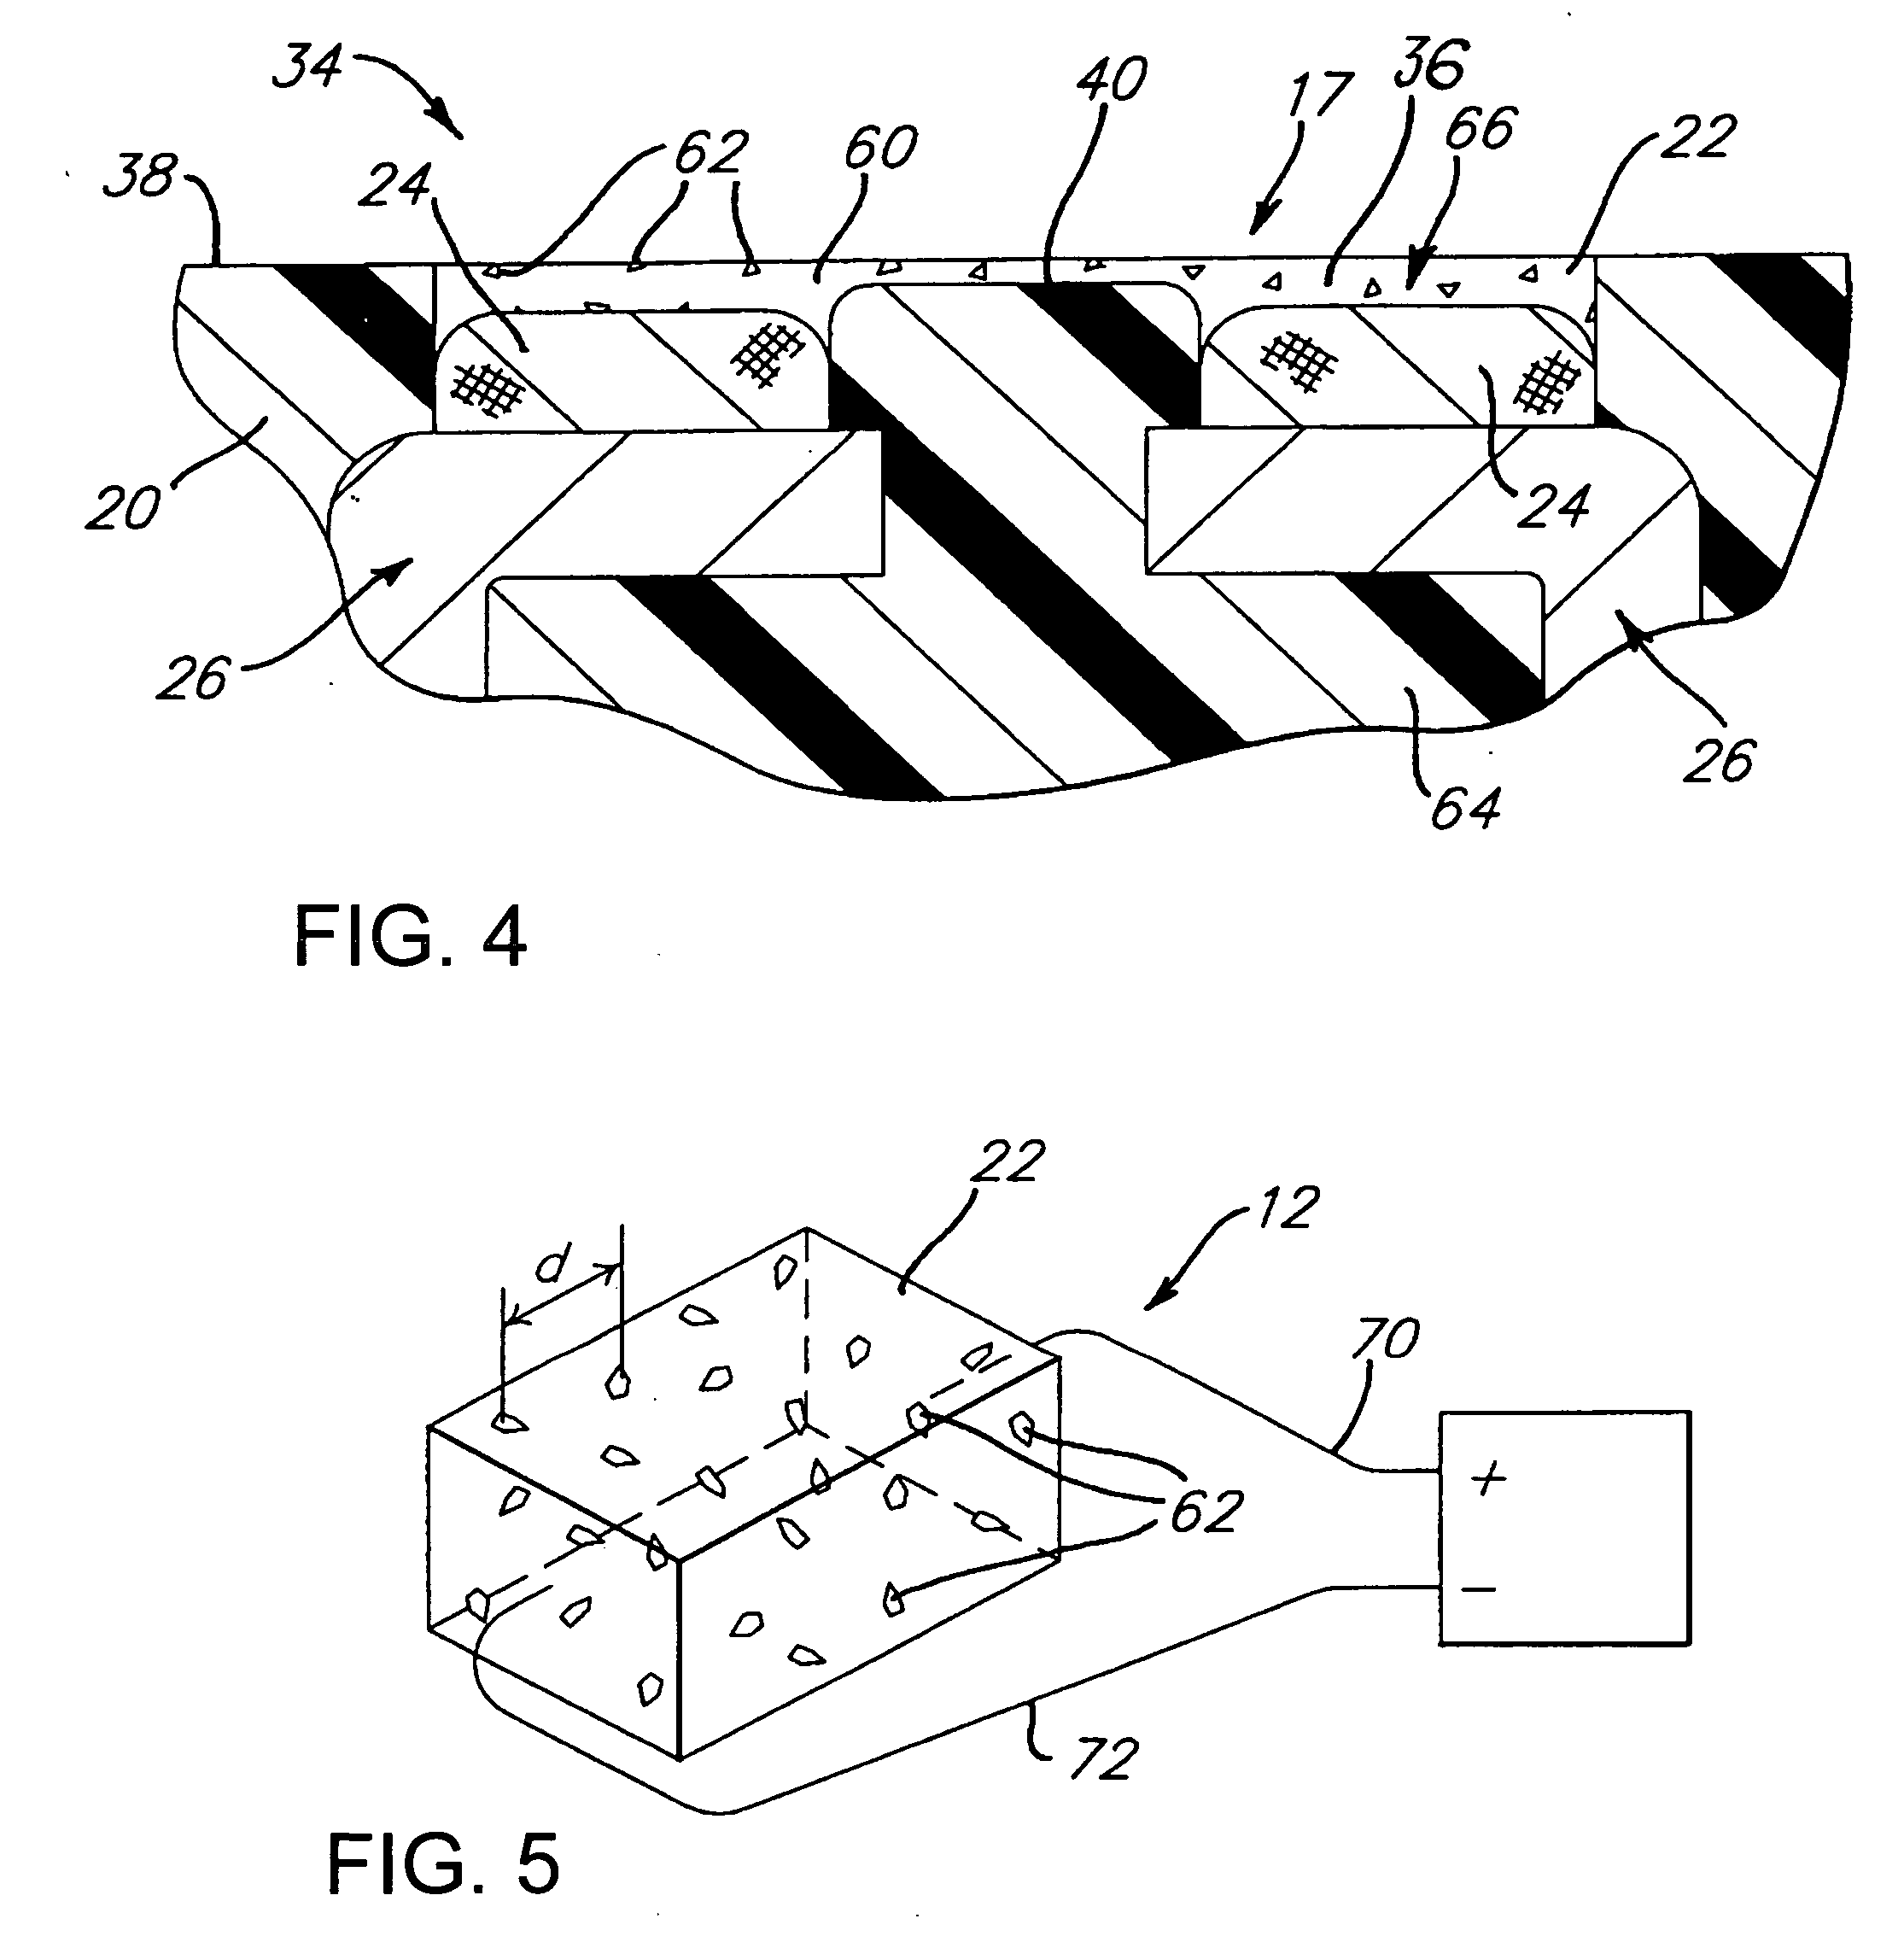 Methods of minimizing temperature cross-sensitivity in vapor sensors and compositions therefor